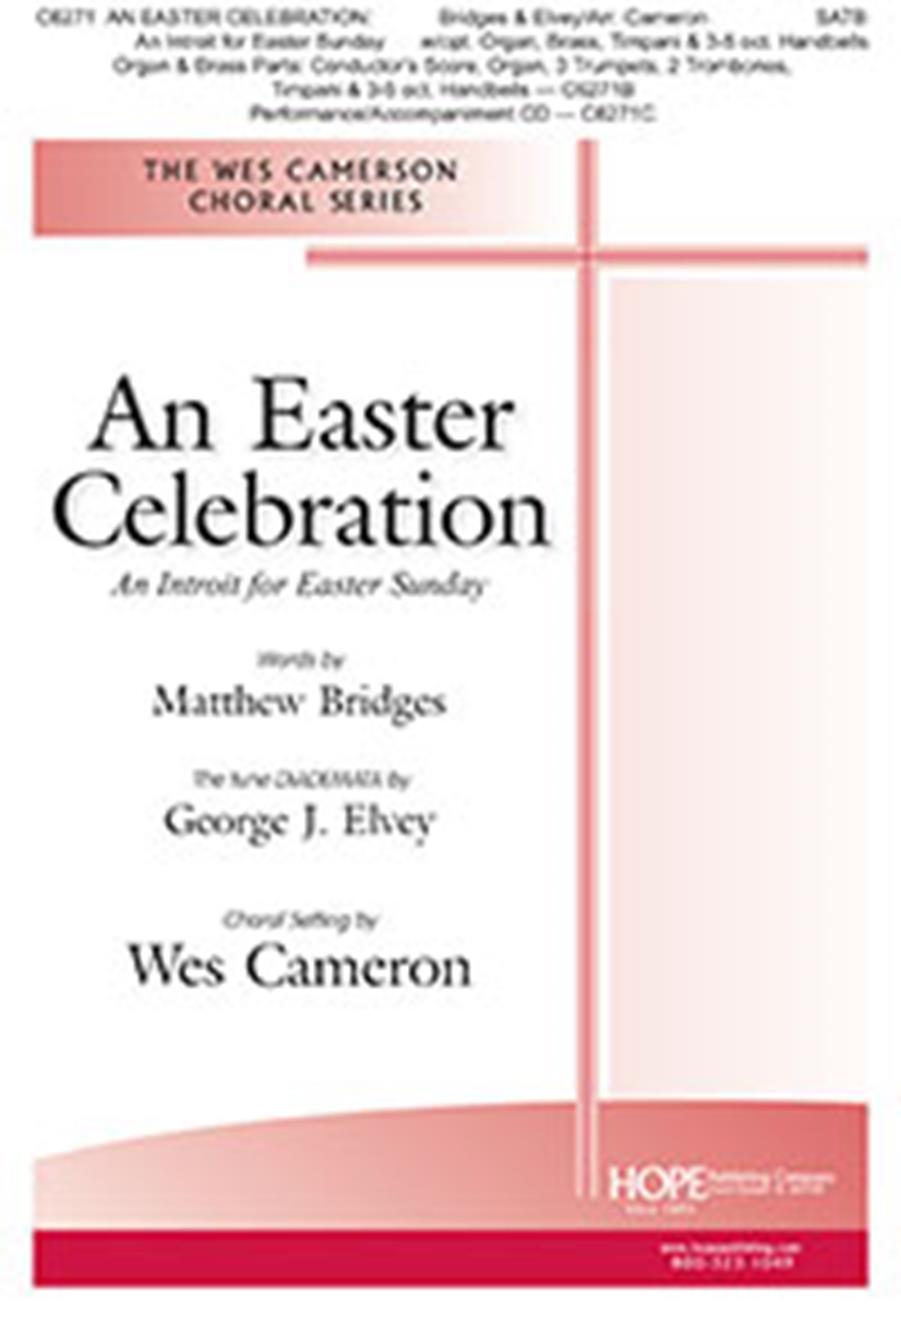 Wes Cameron: Easter Celebration: An Introit for Easter Sunday: SATB: Vocal Score